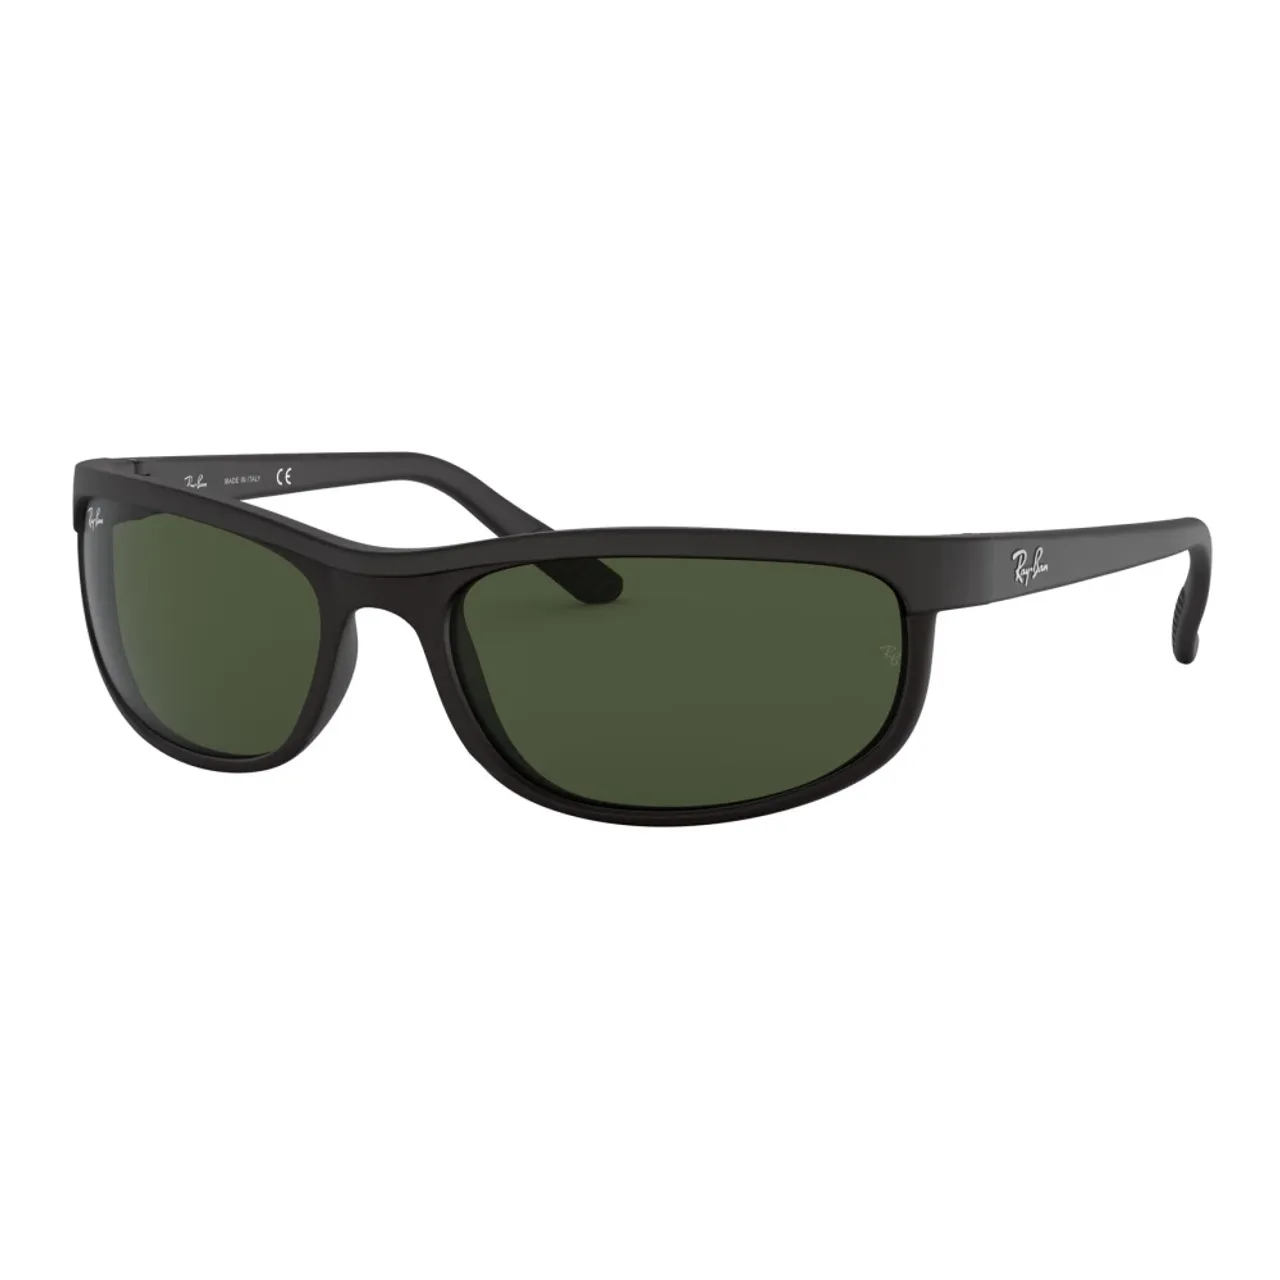 Ray-Ban , Predator 2 Sunglasses - Update Your Style ,Black male, Sizes: